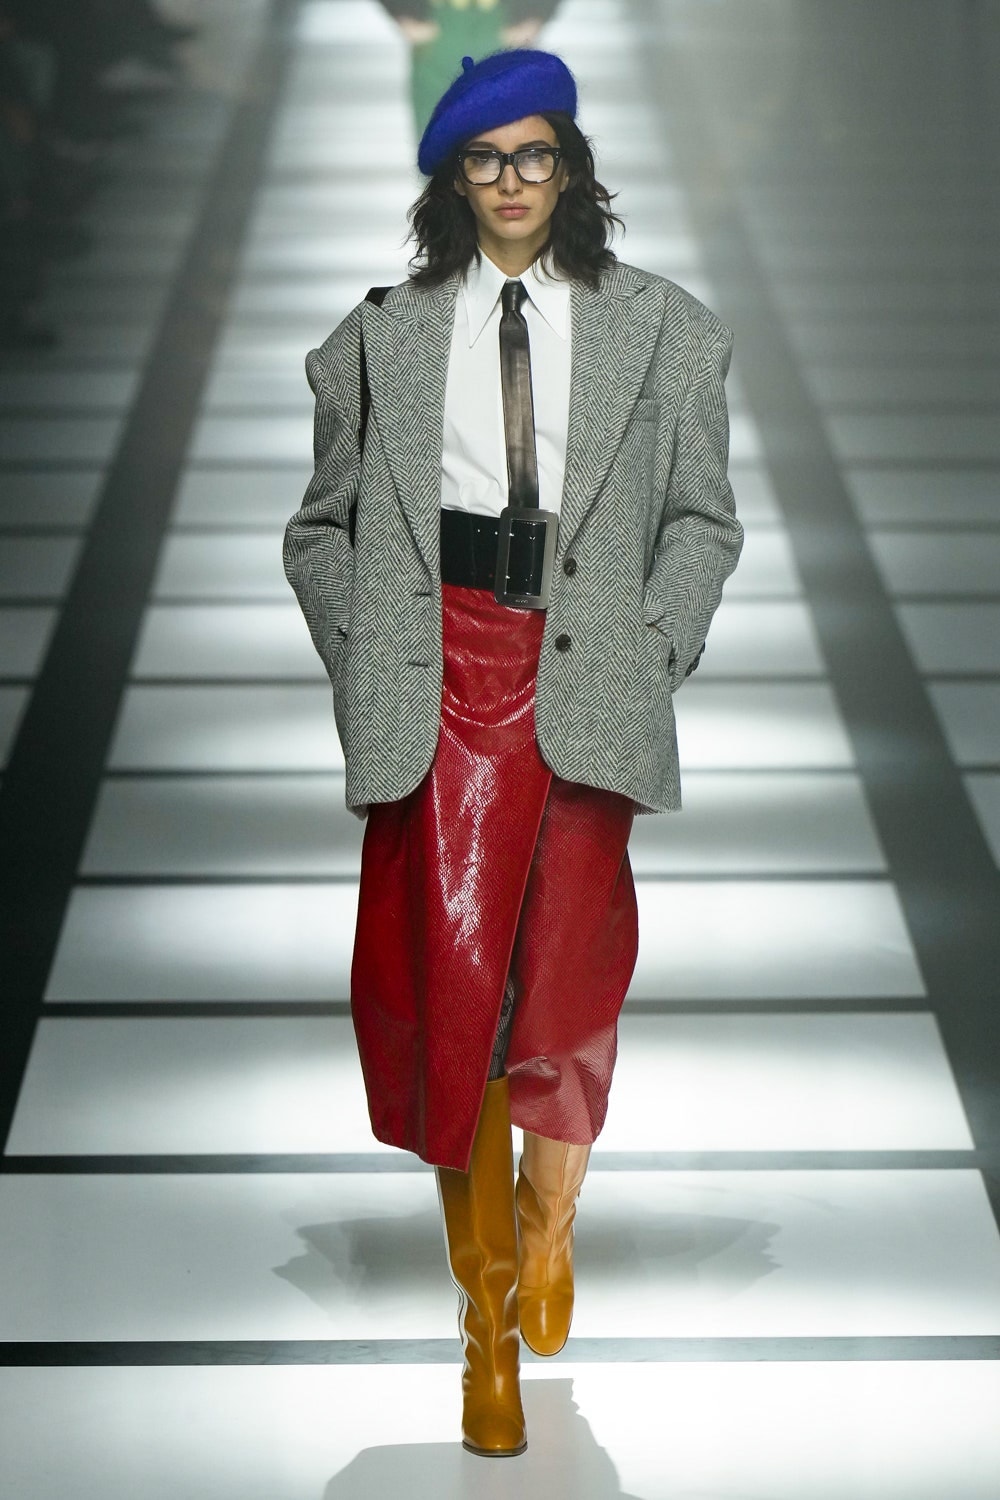 Tom Ford Referenced His Own '90s Gucci Collection for Fall/Winter